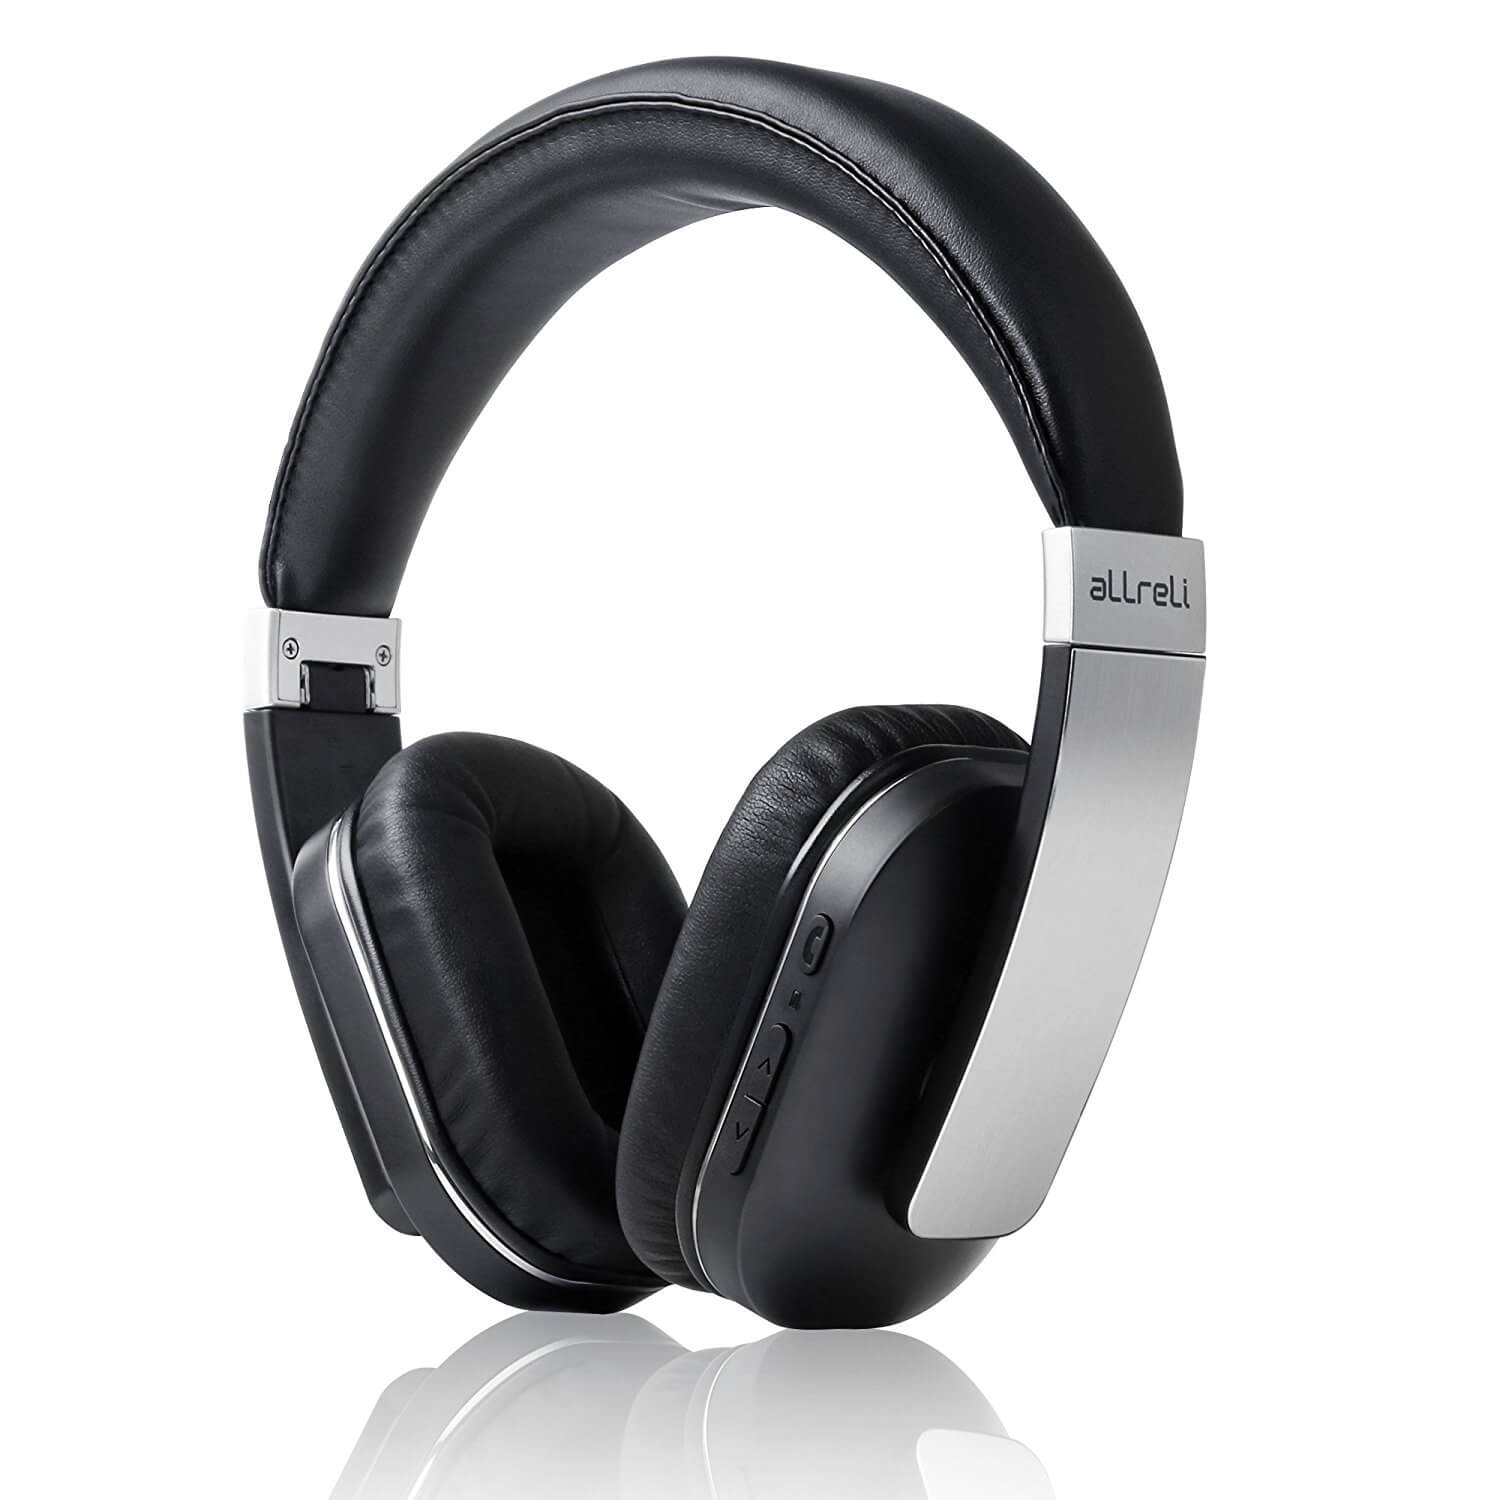 aLLreLi F5 Wireless Bluetooth Over Ear Headphones with Built-In Mic ...